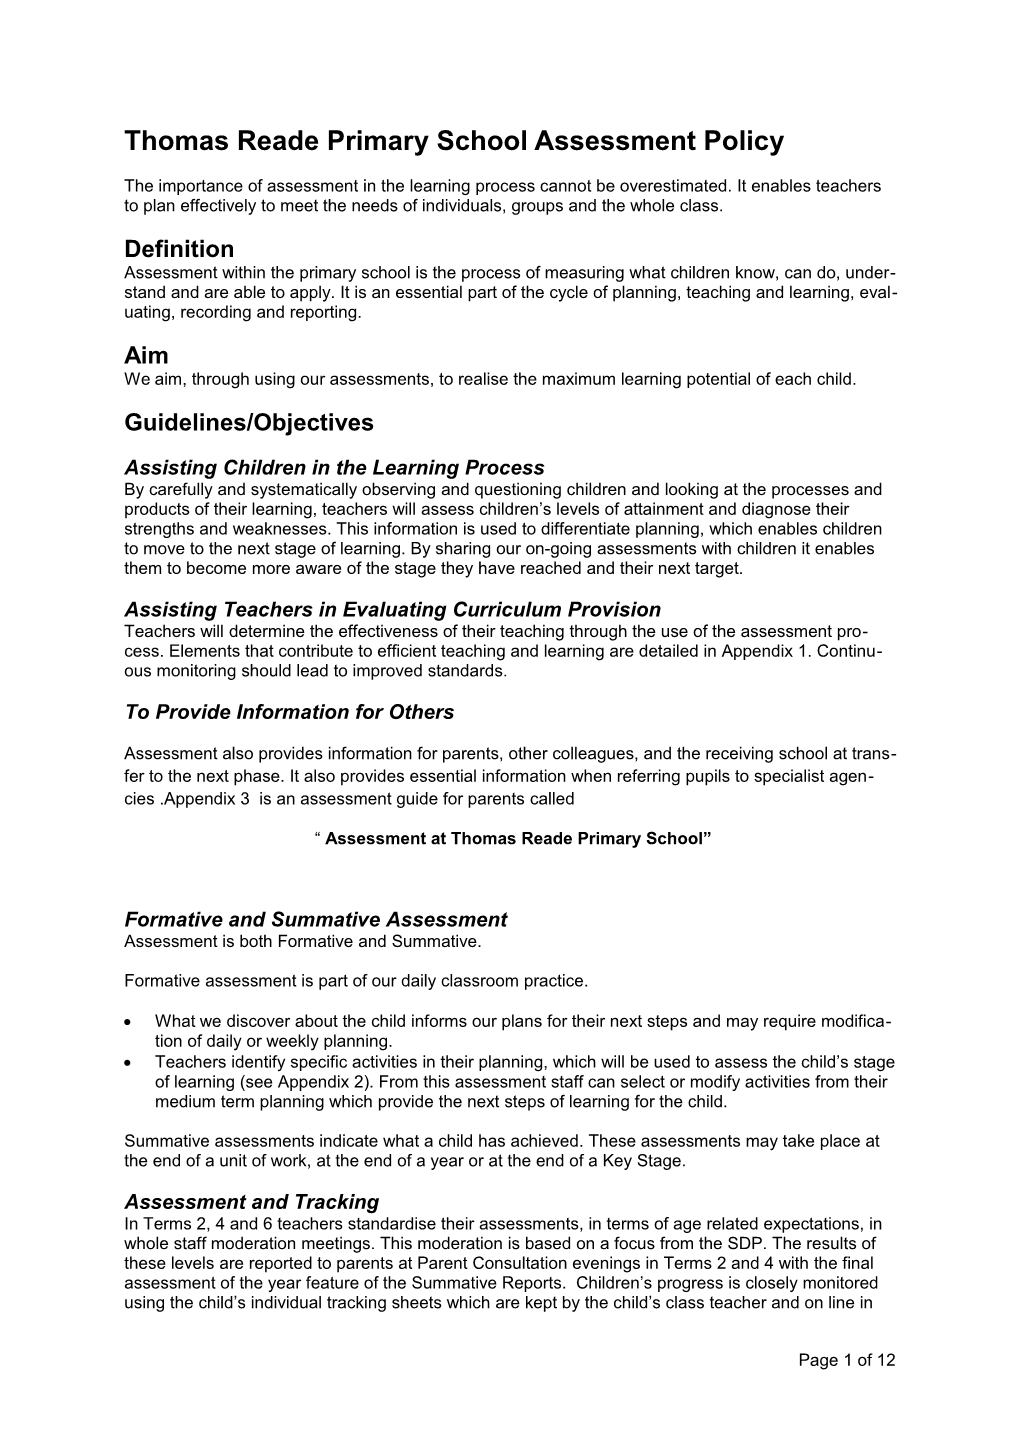 Thomas Reade Primary School Assessment Policy